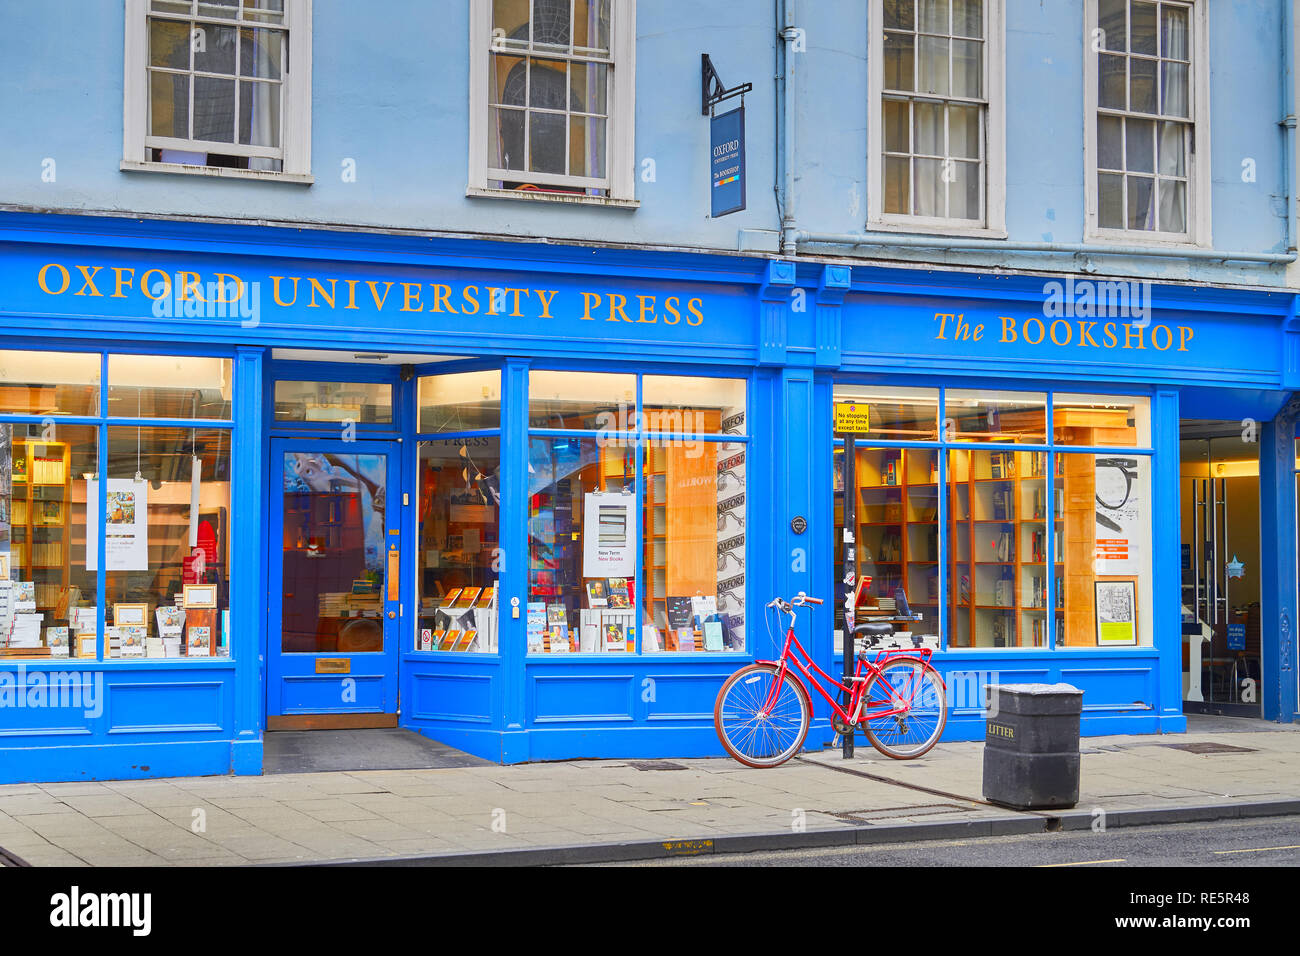 Book display in the windows at the bookshop of Oxford University Press (OUP), Oxford, England. Stock Photo